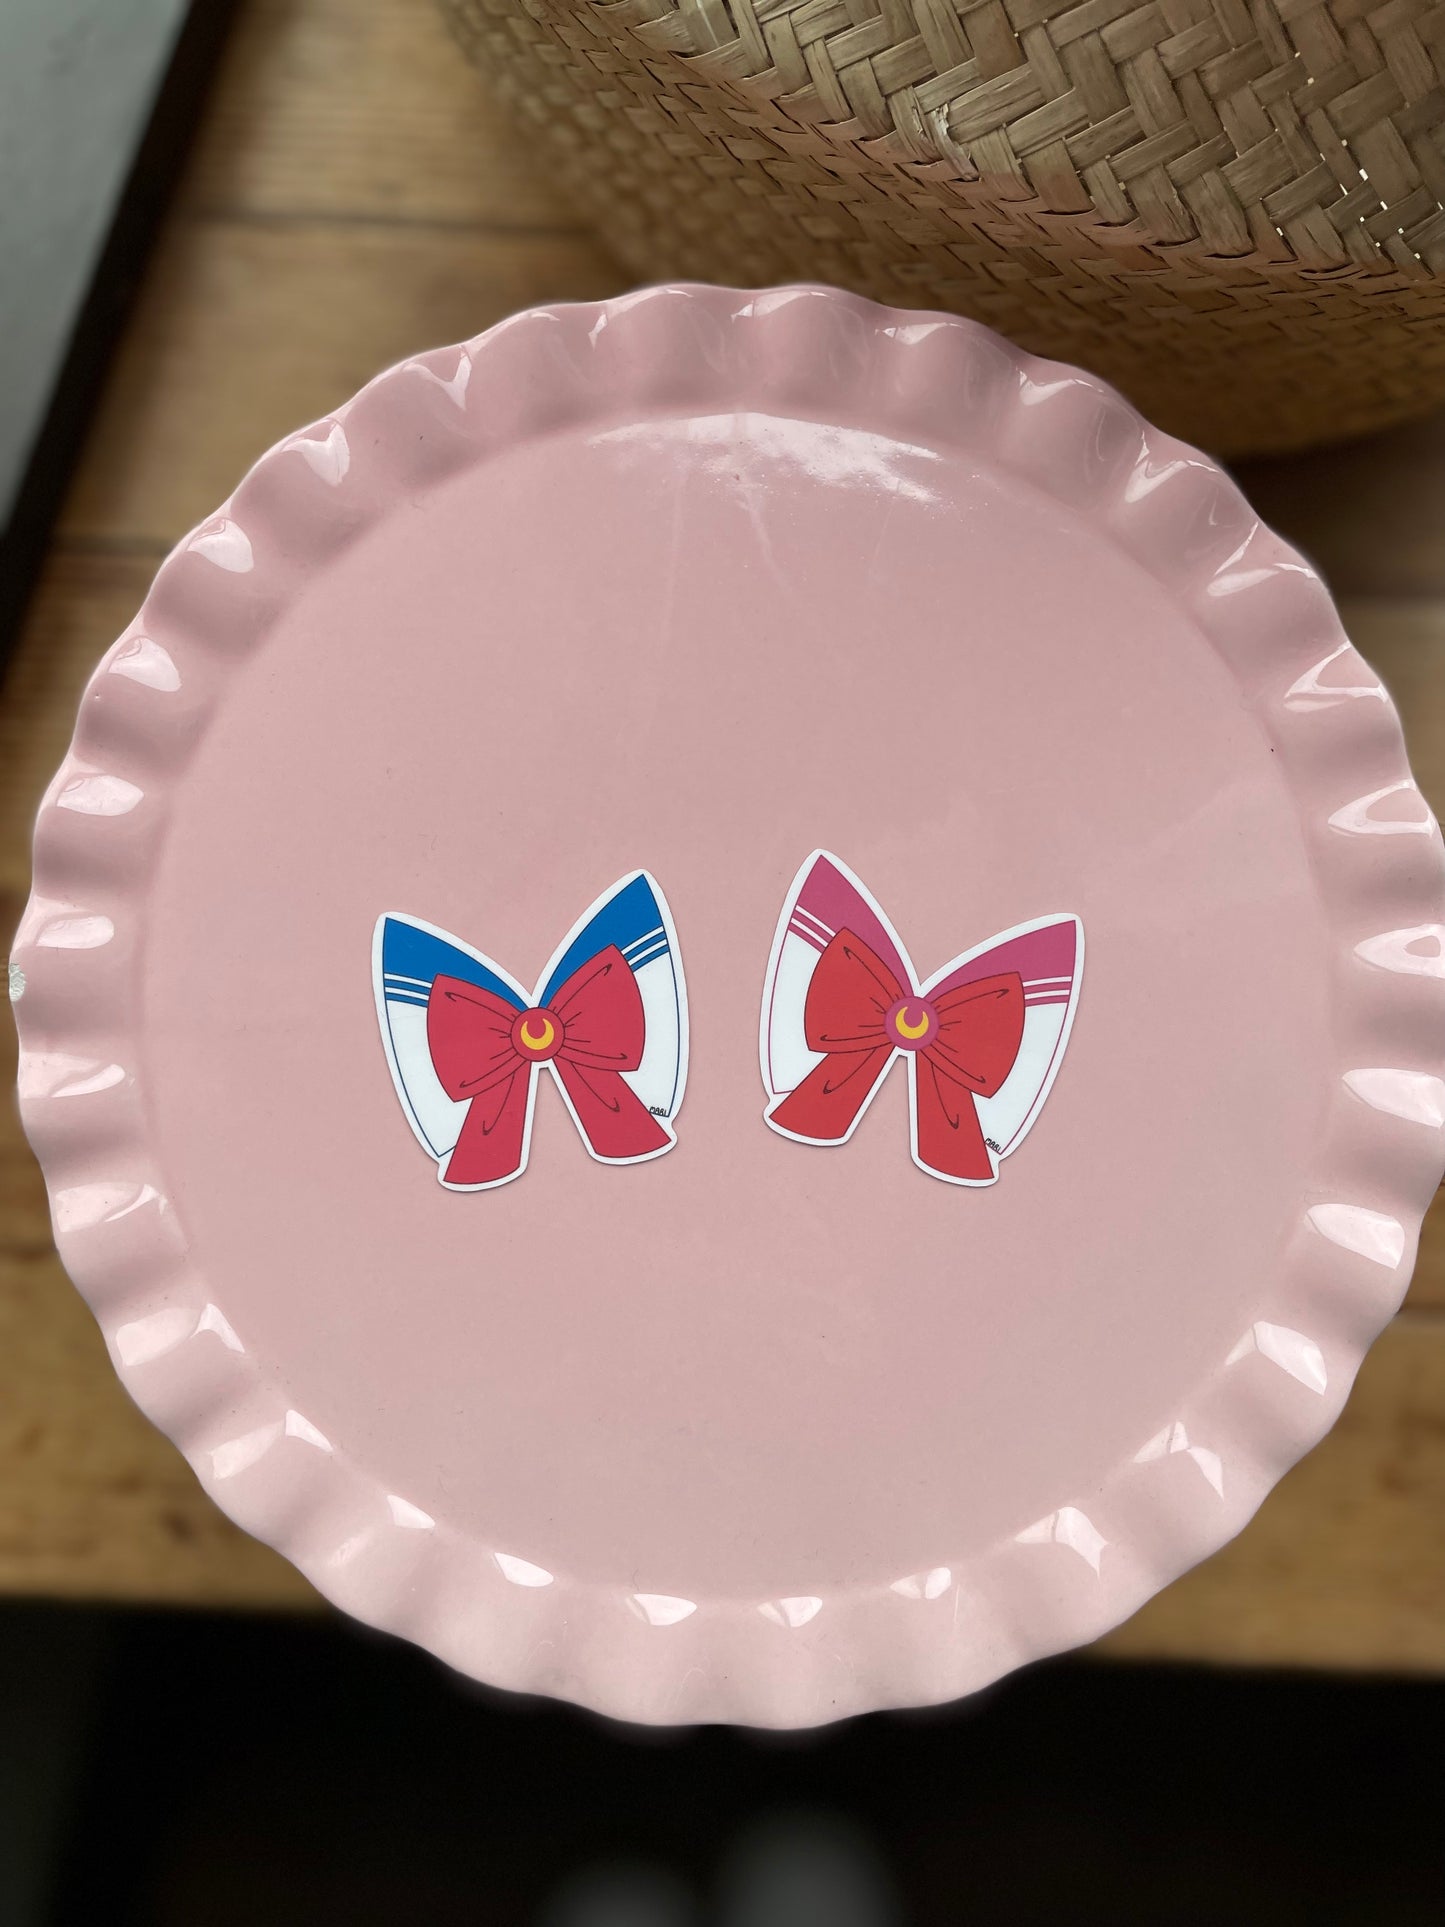 Sailor Scout Pink Bow Sticker